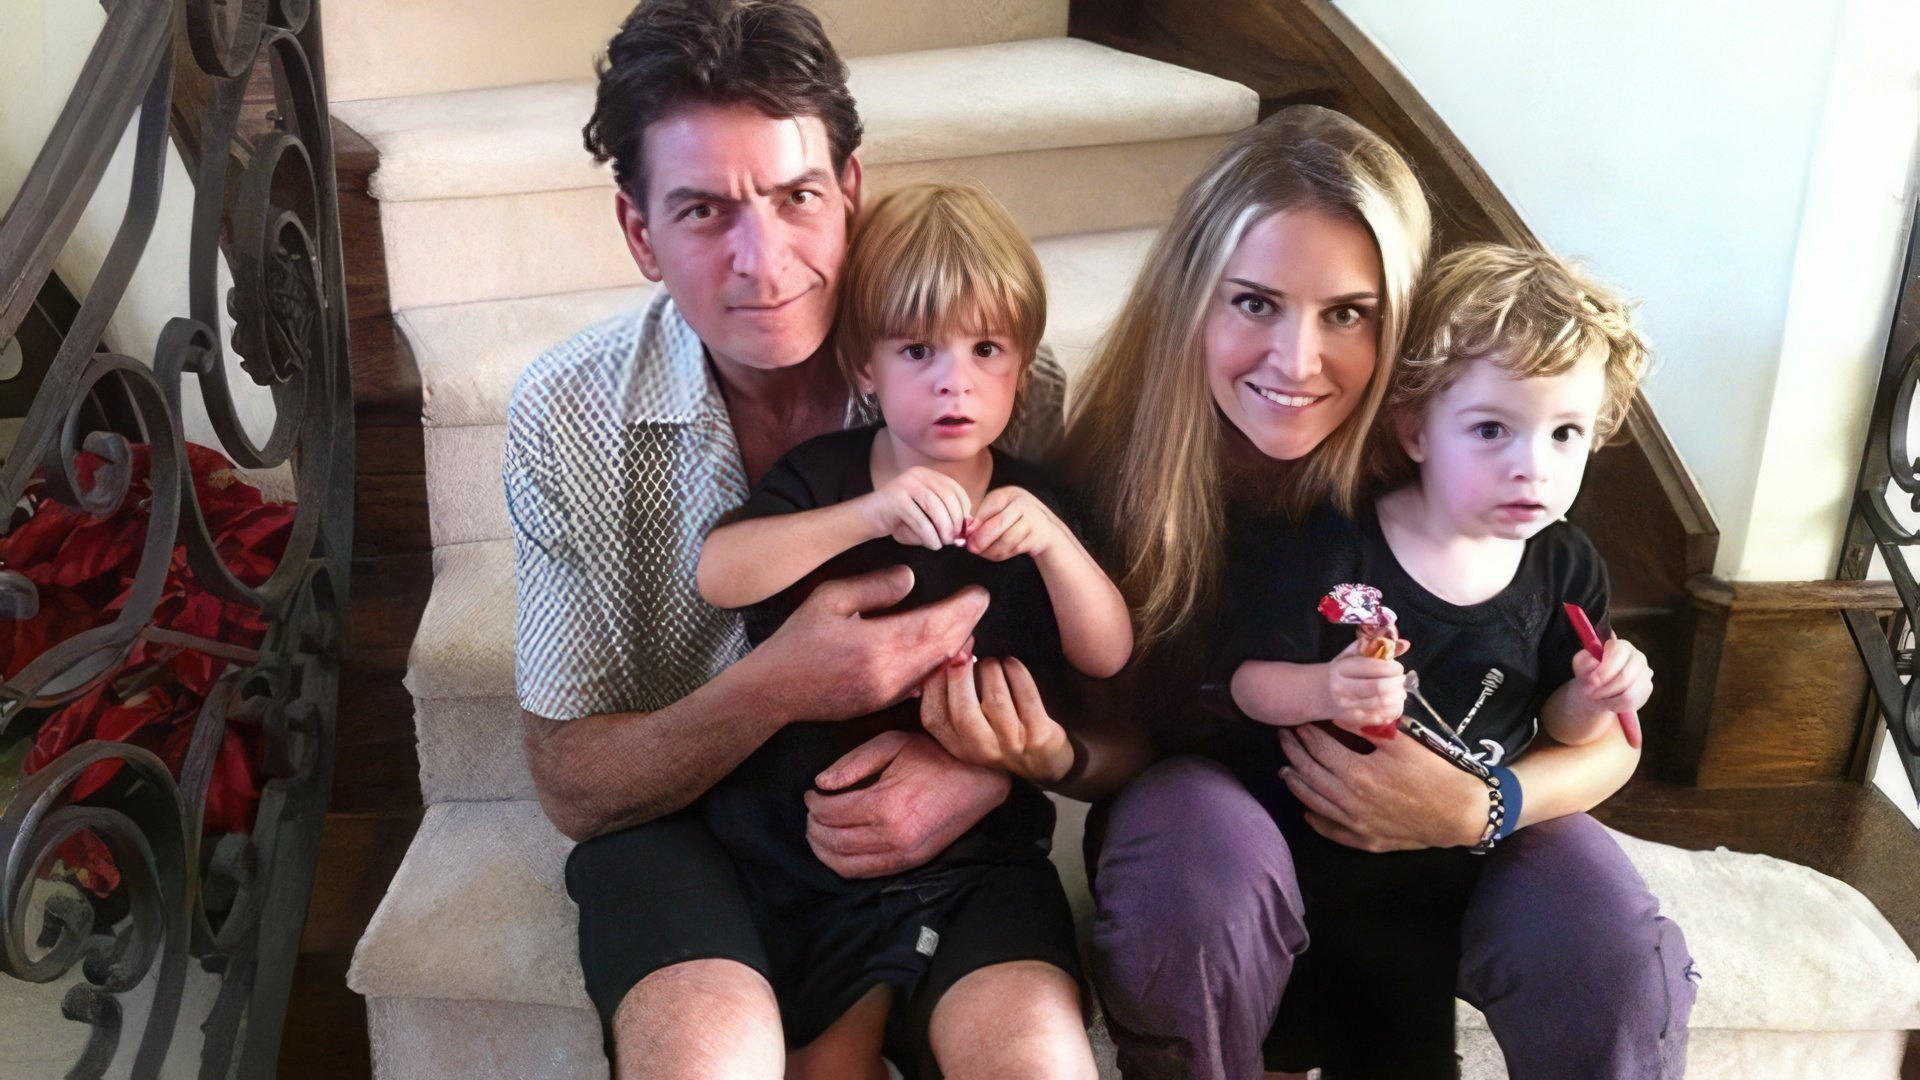 Charlie Sheen and Brooke Mueller with kids